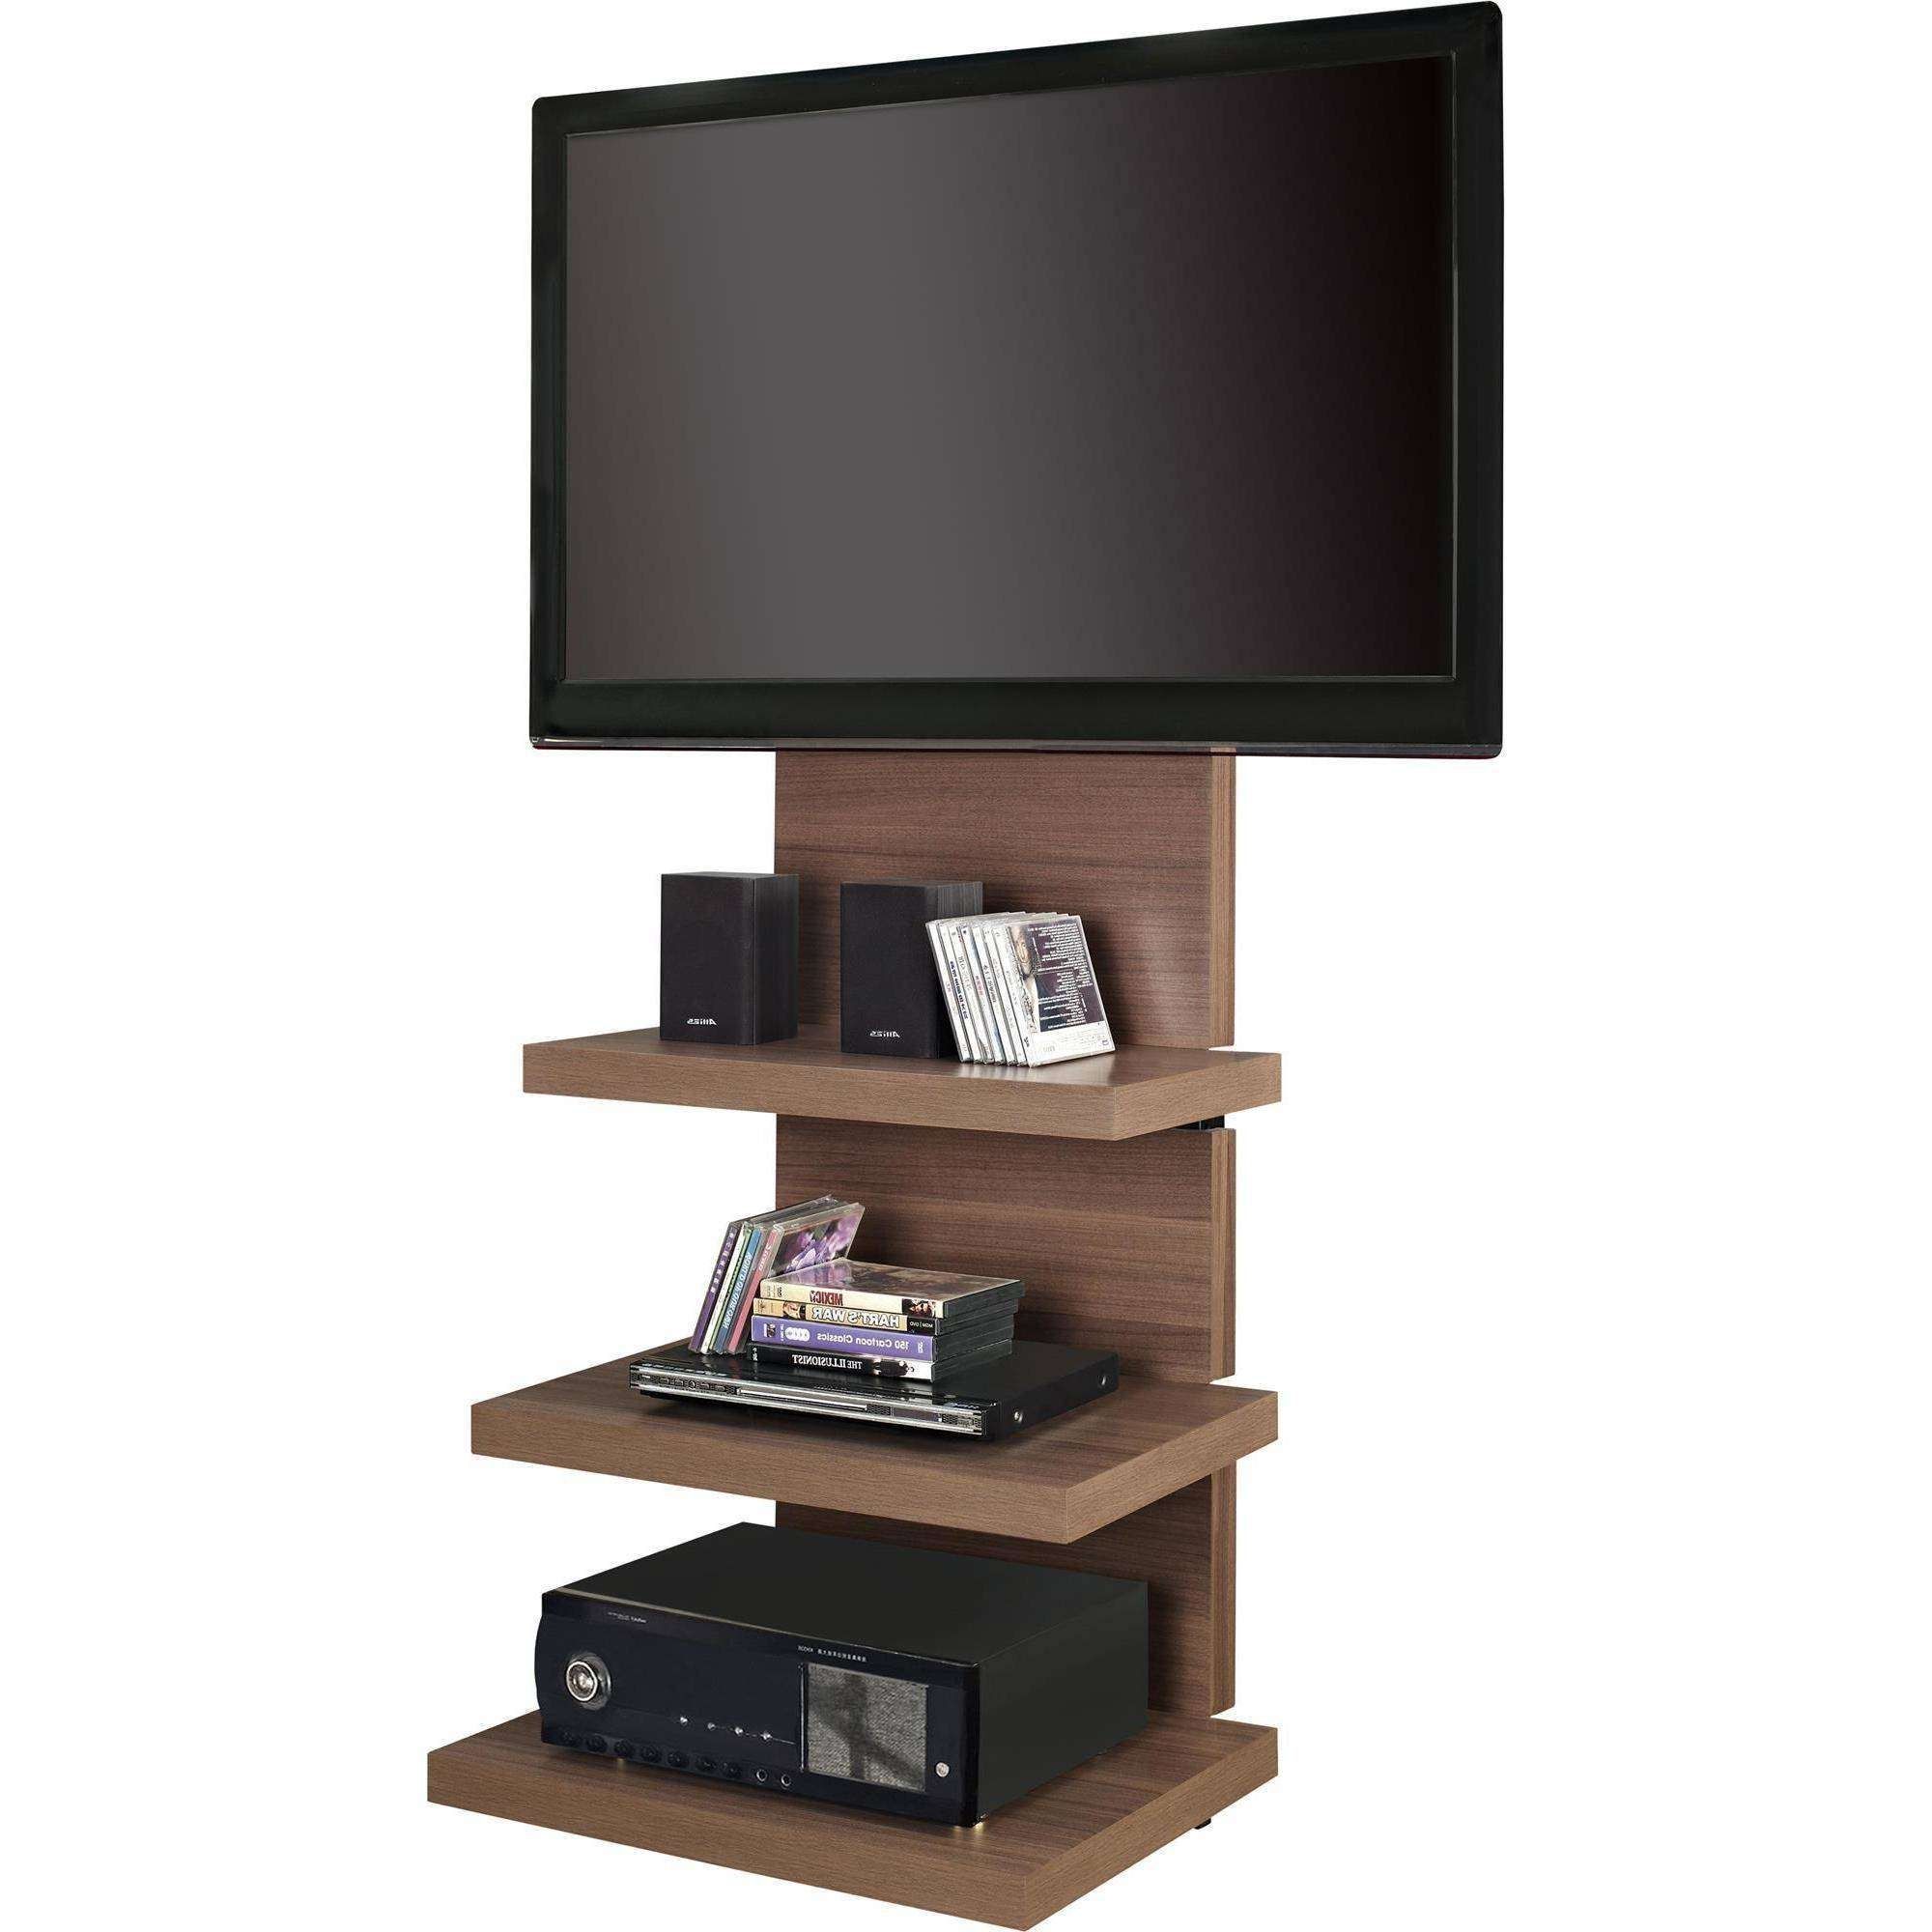 Altra Wall Mount Tv Stand With 3 Shelves, For Tvs Up To 60" | Ebay Throughout Wall Mounted Tv Stands With Shelves (View 2 of 15)